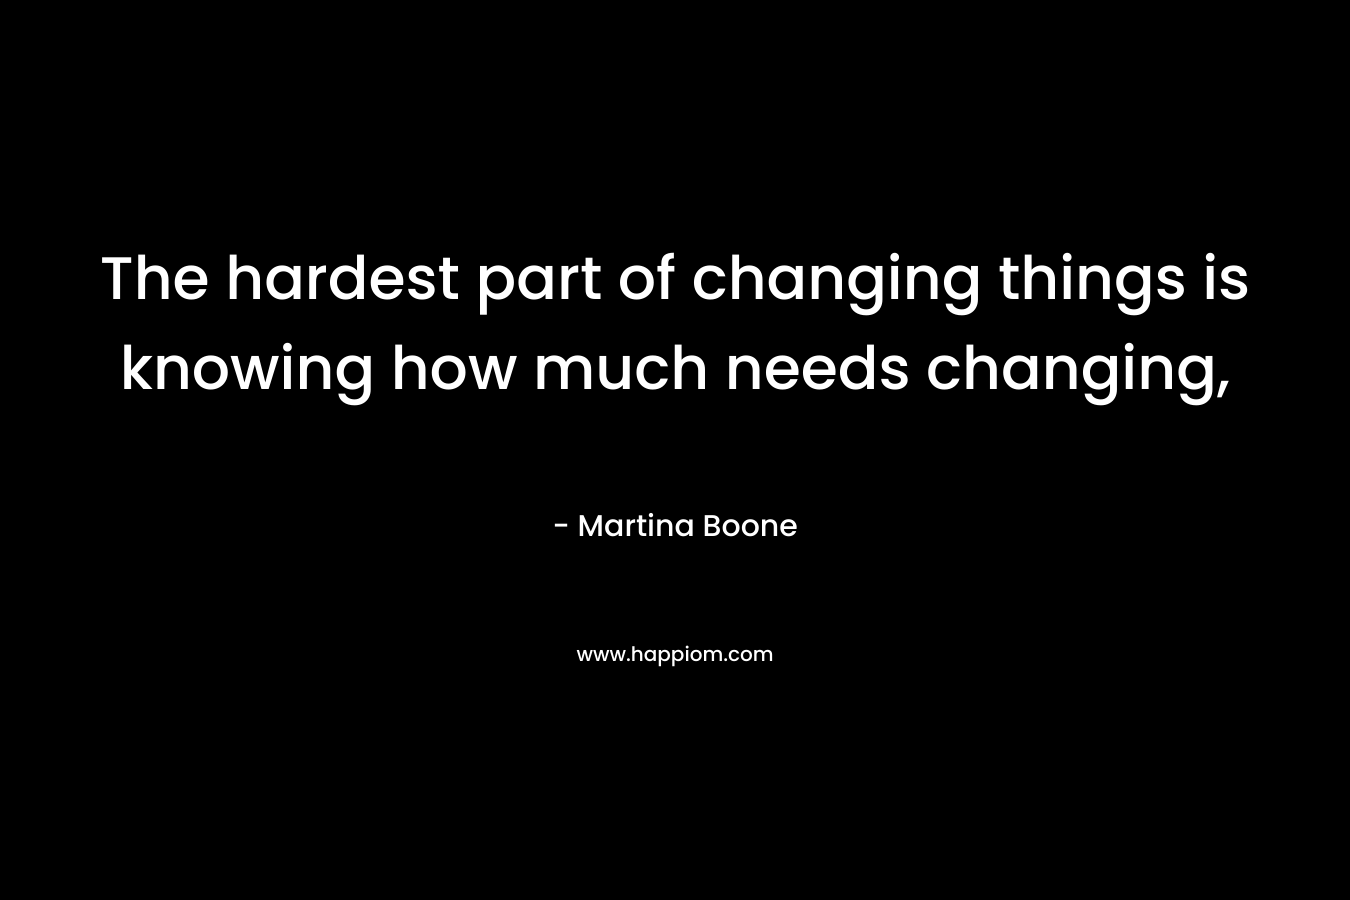 The hardest part of changing things is knowing how much needs changing,